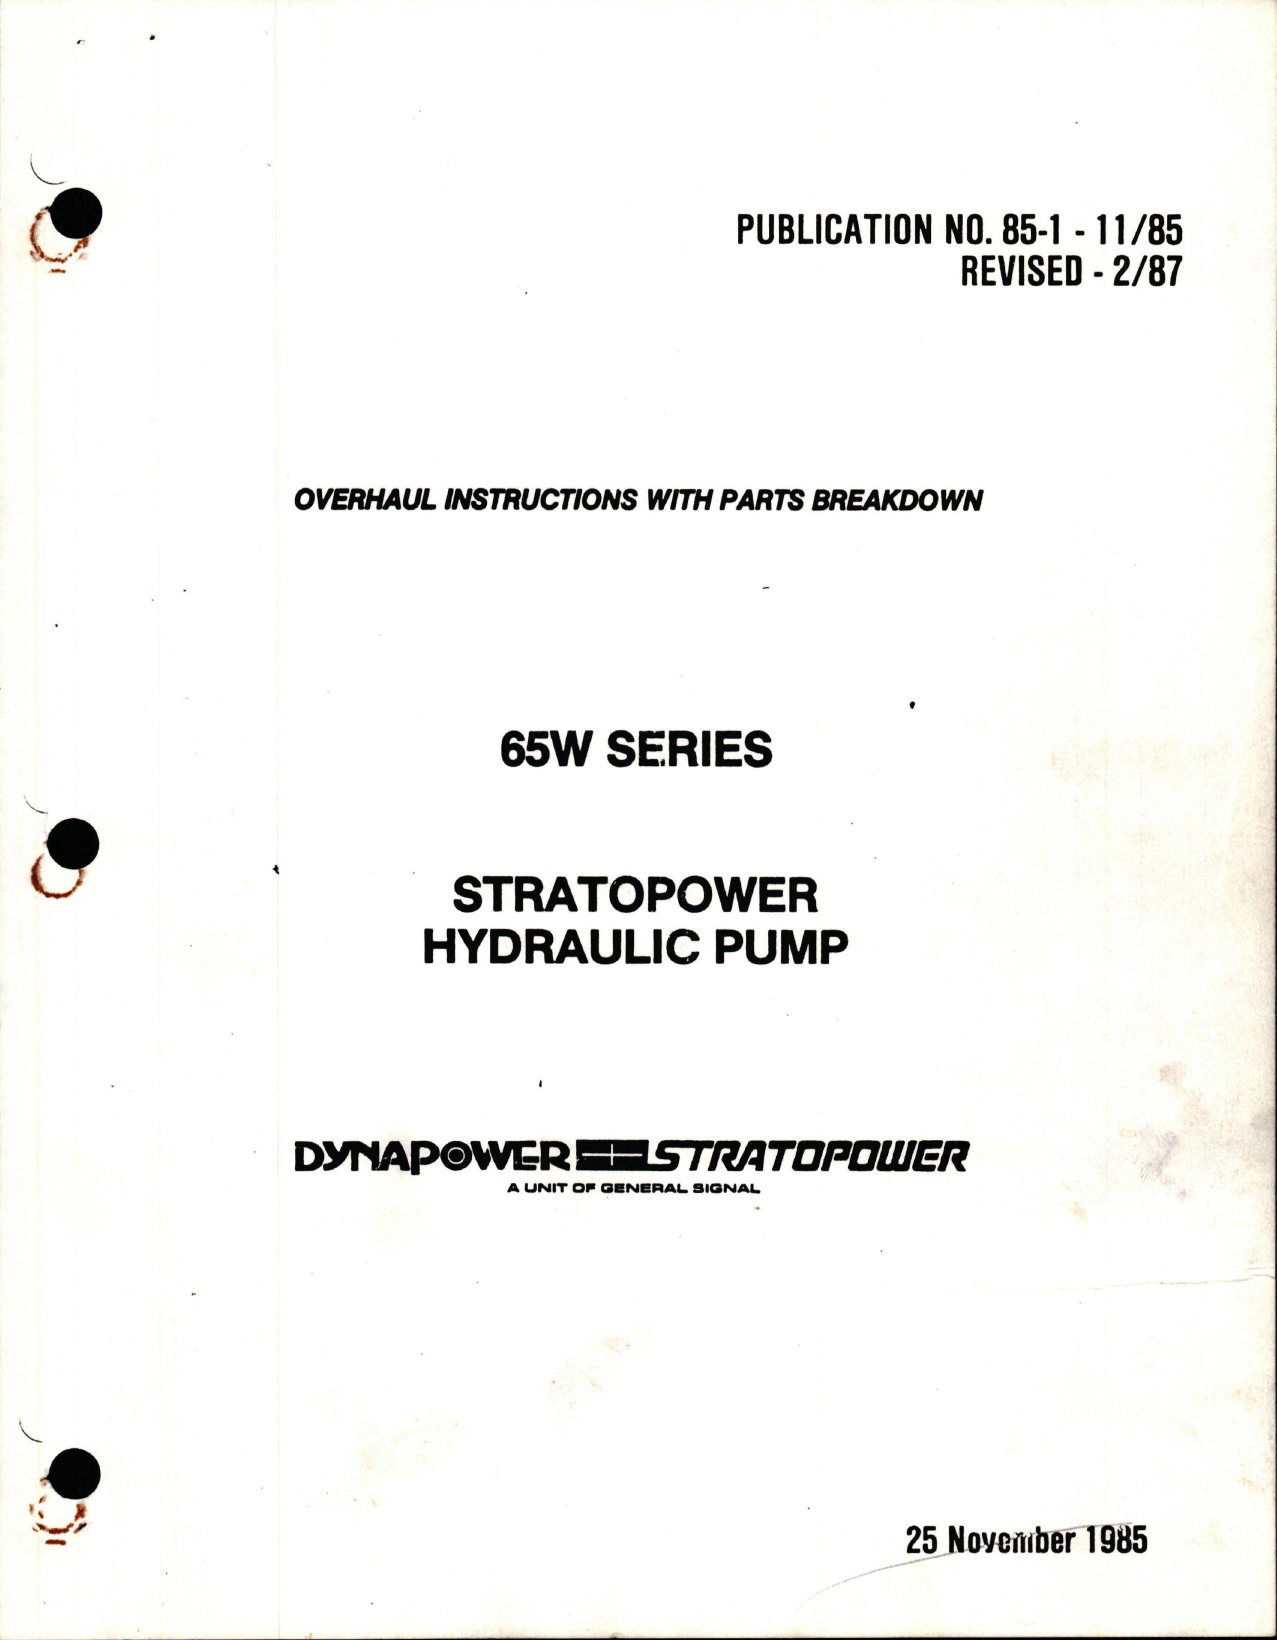 Sample page 1 from AirCorps Library document: Overhaul Instructions with Parts Breakdown for Stratopower Hydraulic Pump 65W Series